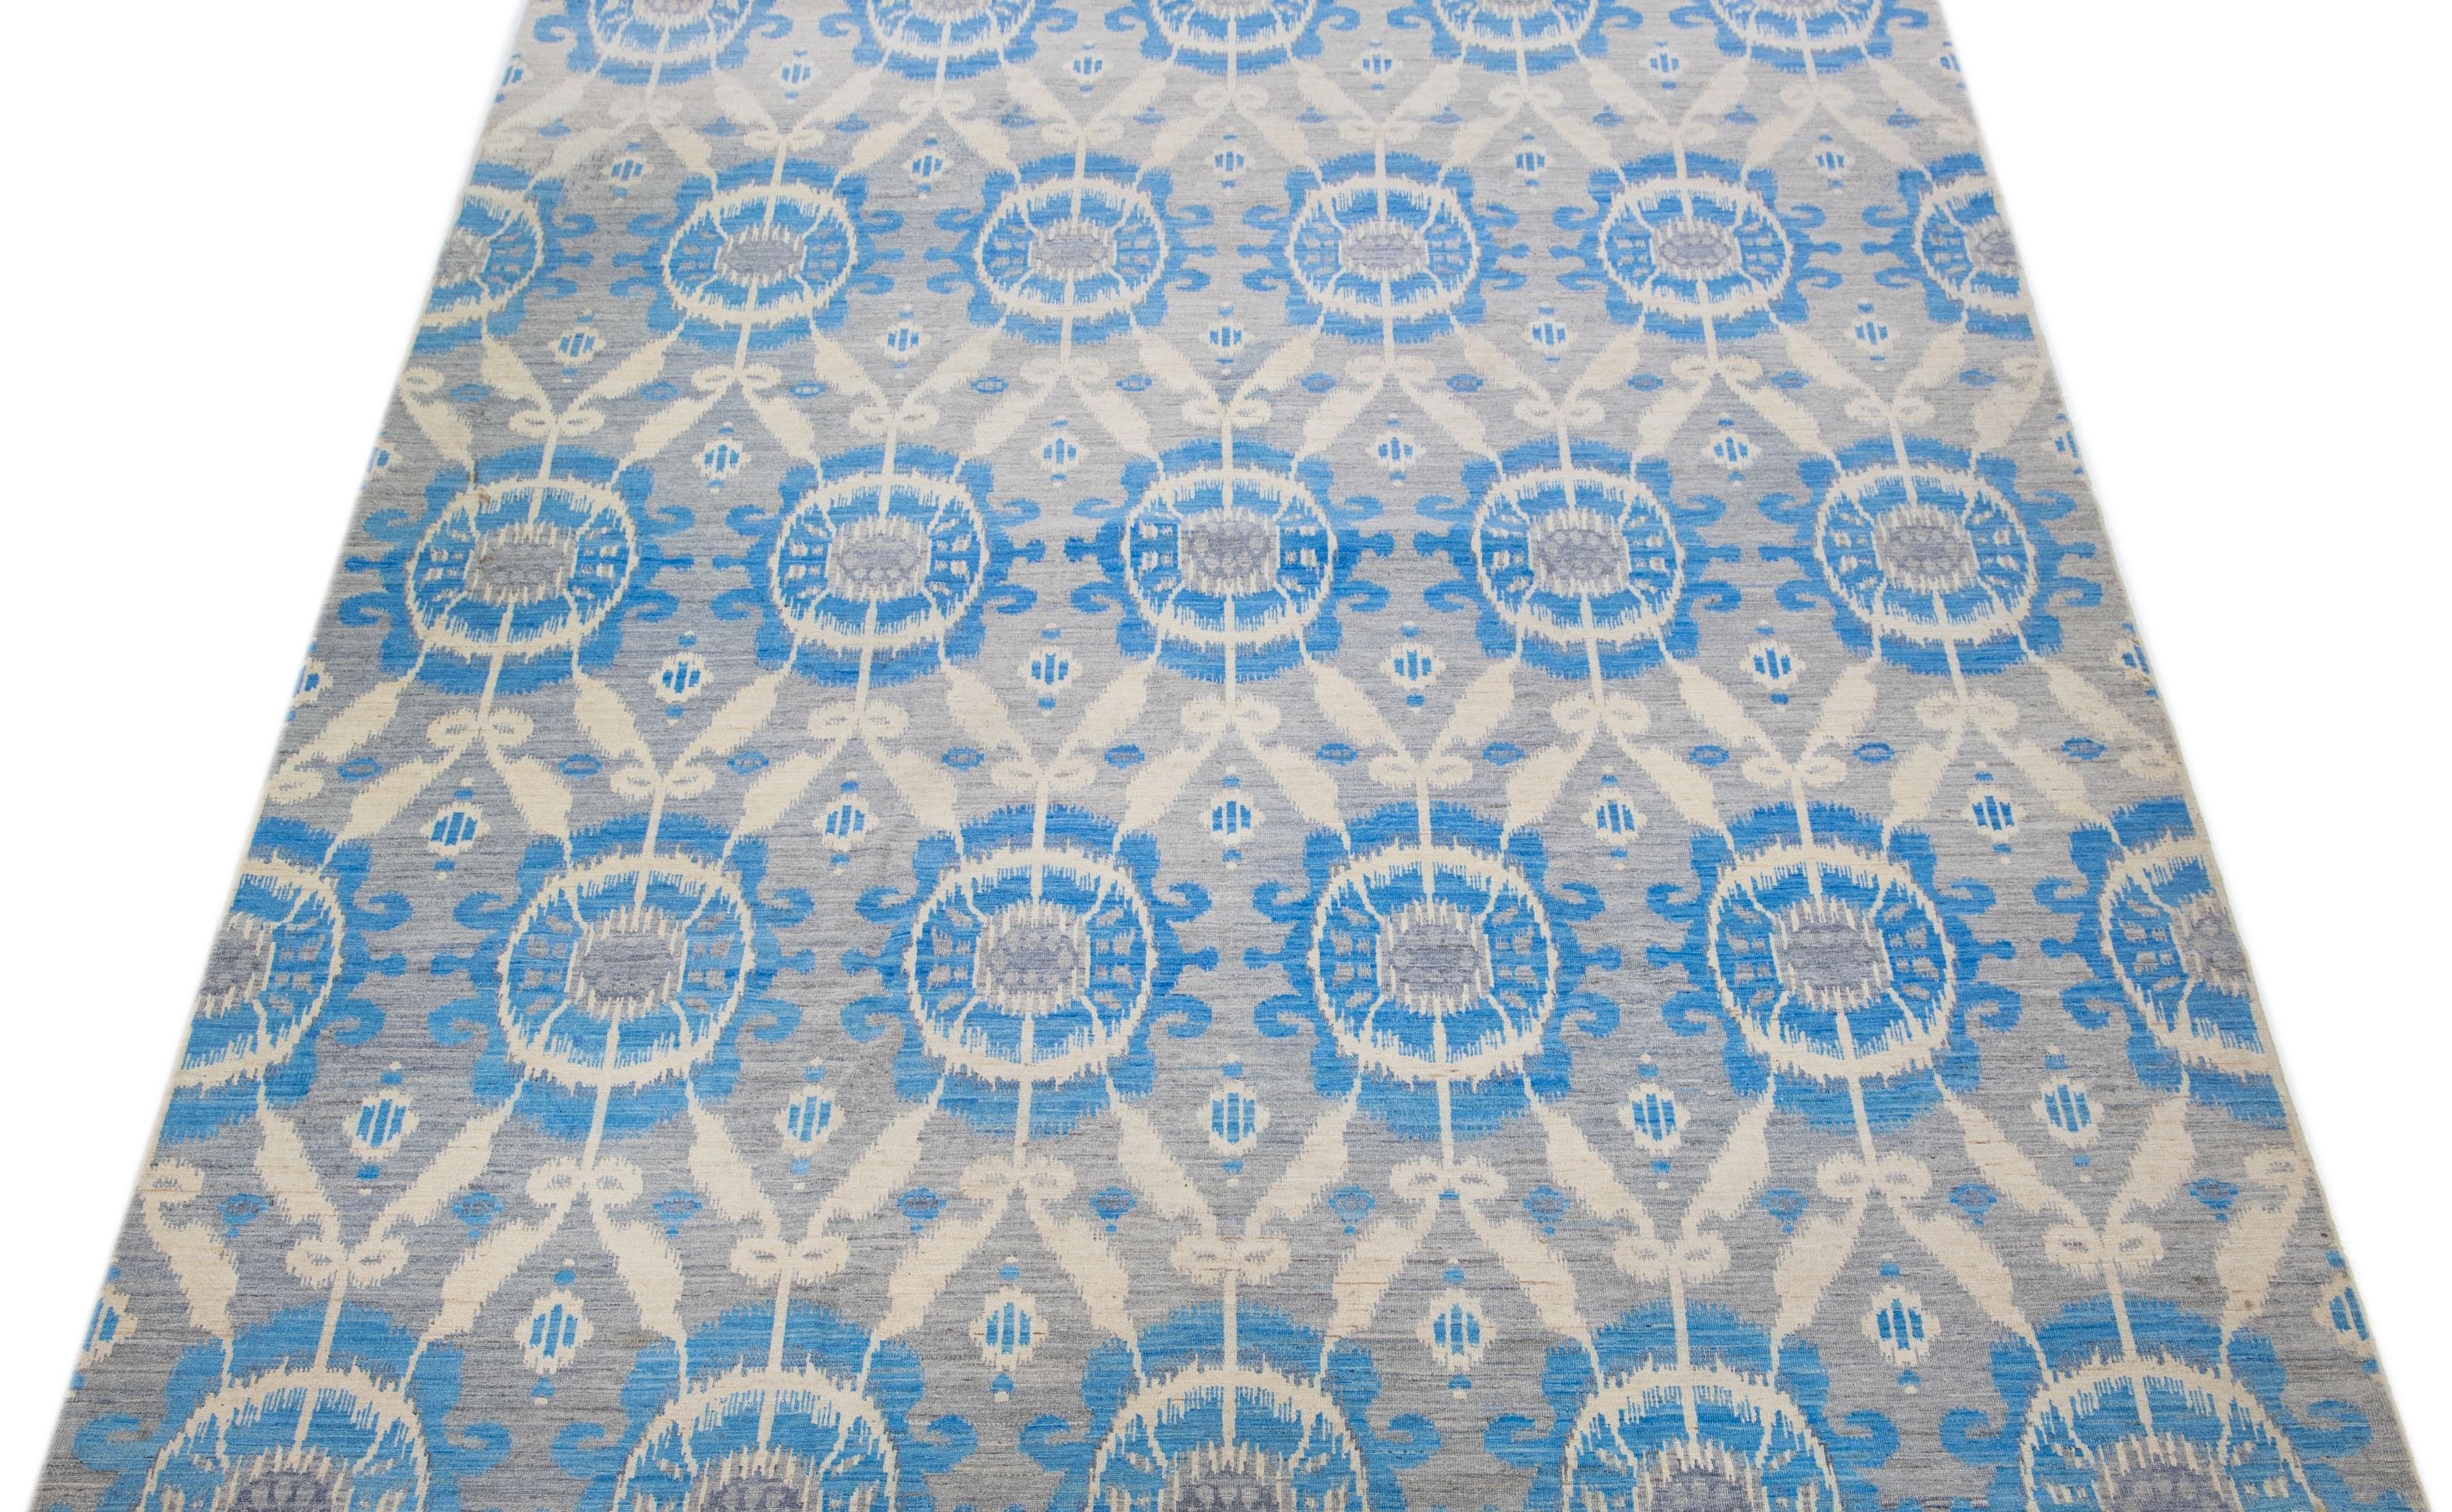 This stunning Ikat rug is hand knotted from wool and boasts a stylish gray color field. Its all-over geometric design is accentuated with elegant blue and beige hues, making it a gorgeous addition to any modern space.

This rug measures 9'2